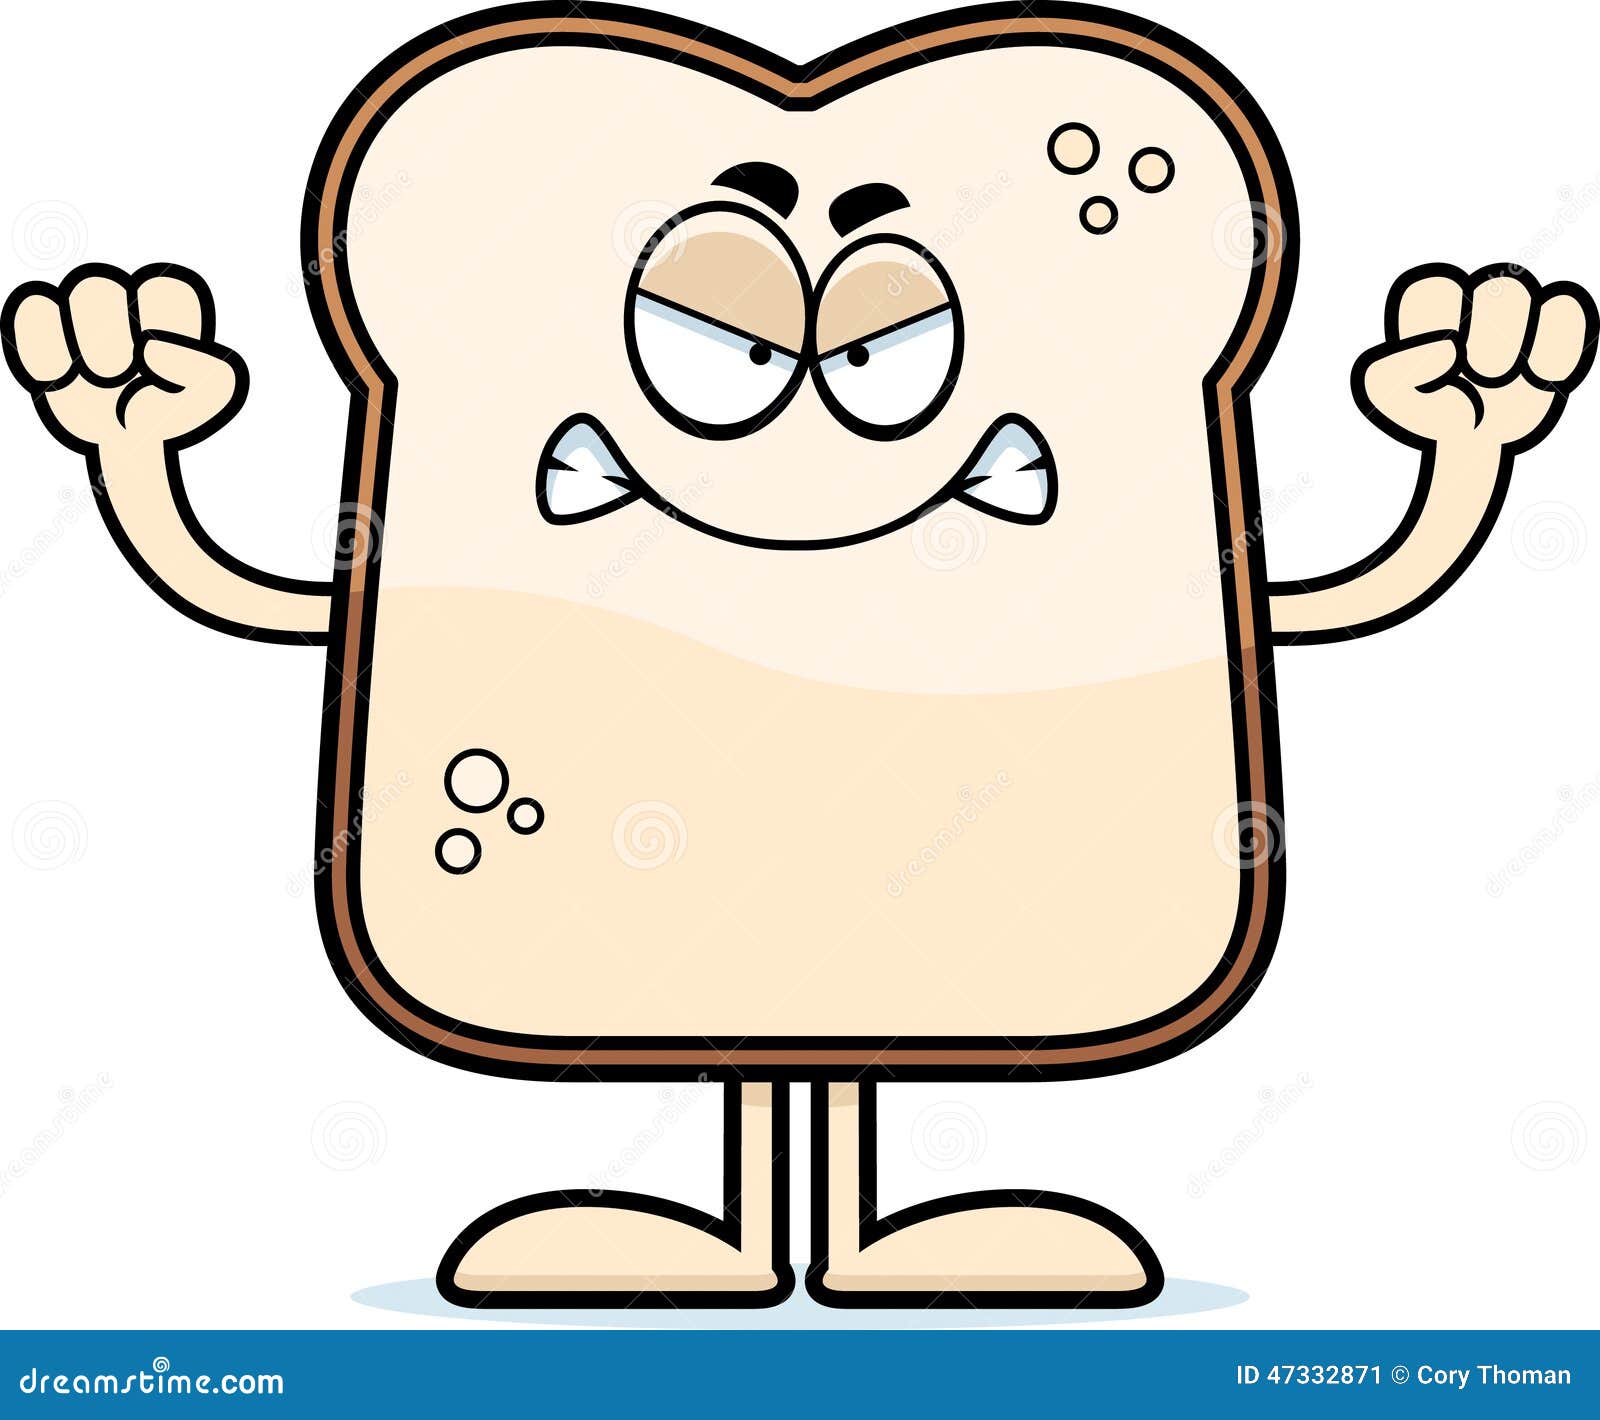 Angry Cartoon Bread stock vector. Illustration of angry - 47332871